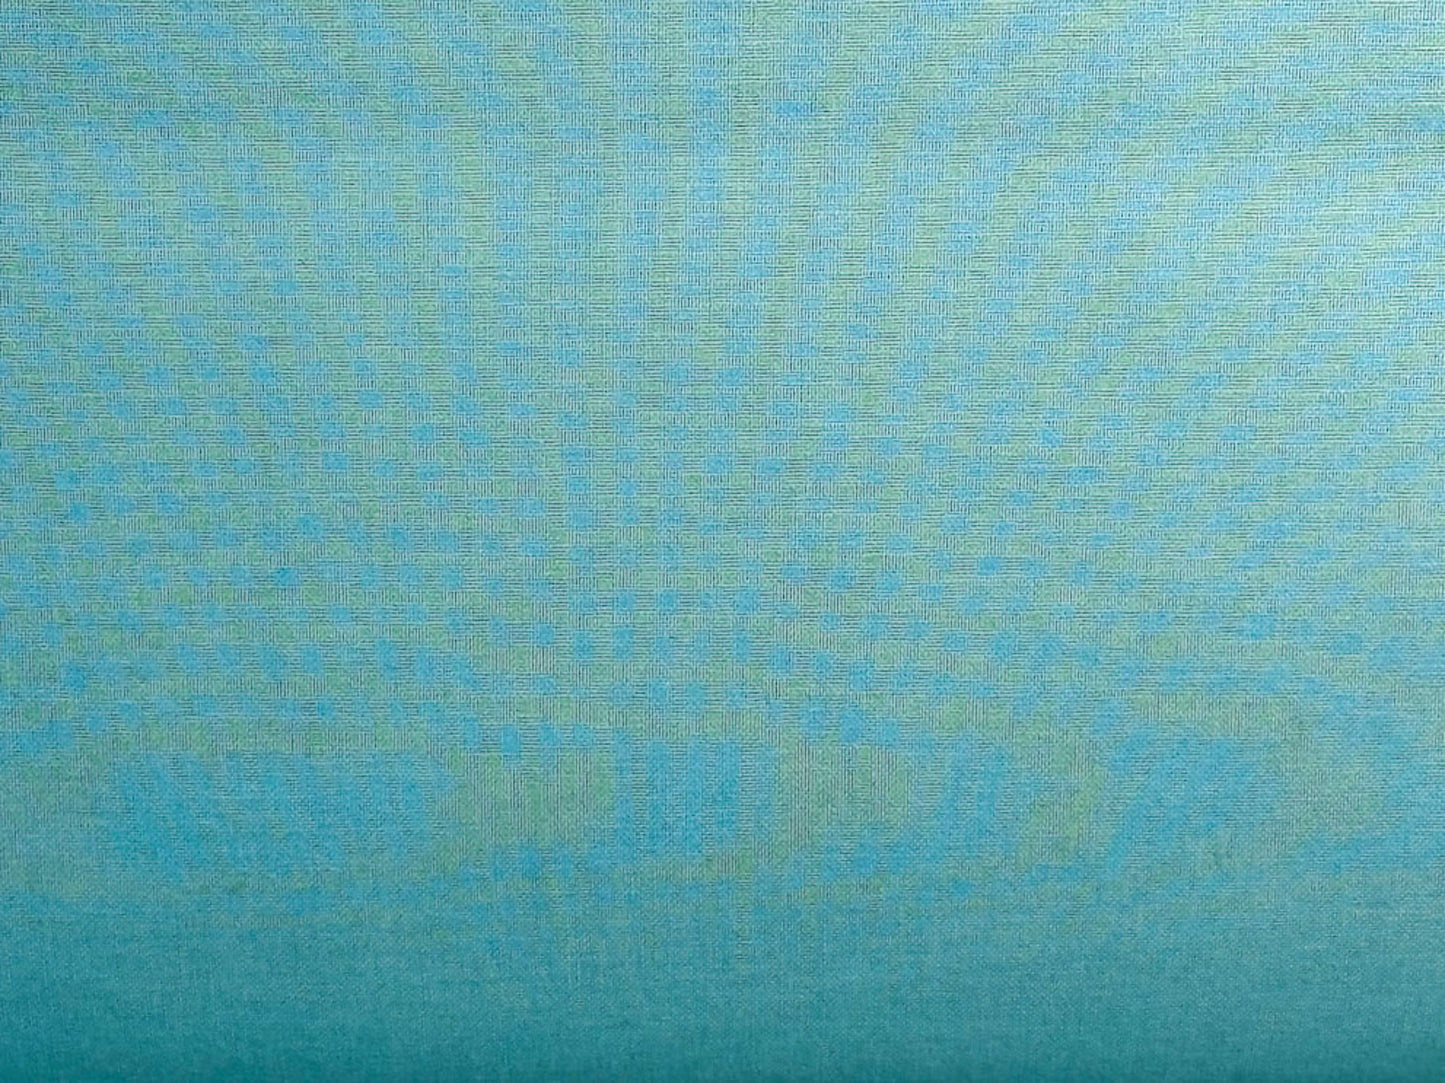 Solid teal blue cotton fabric